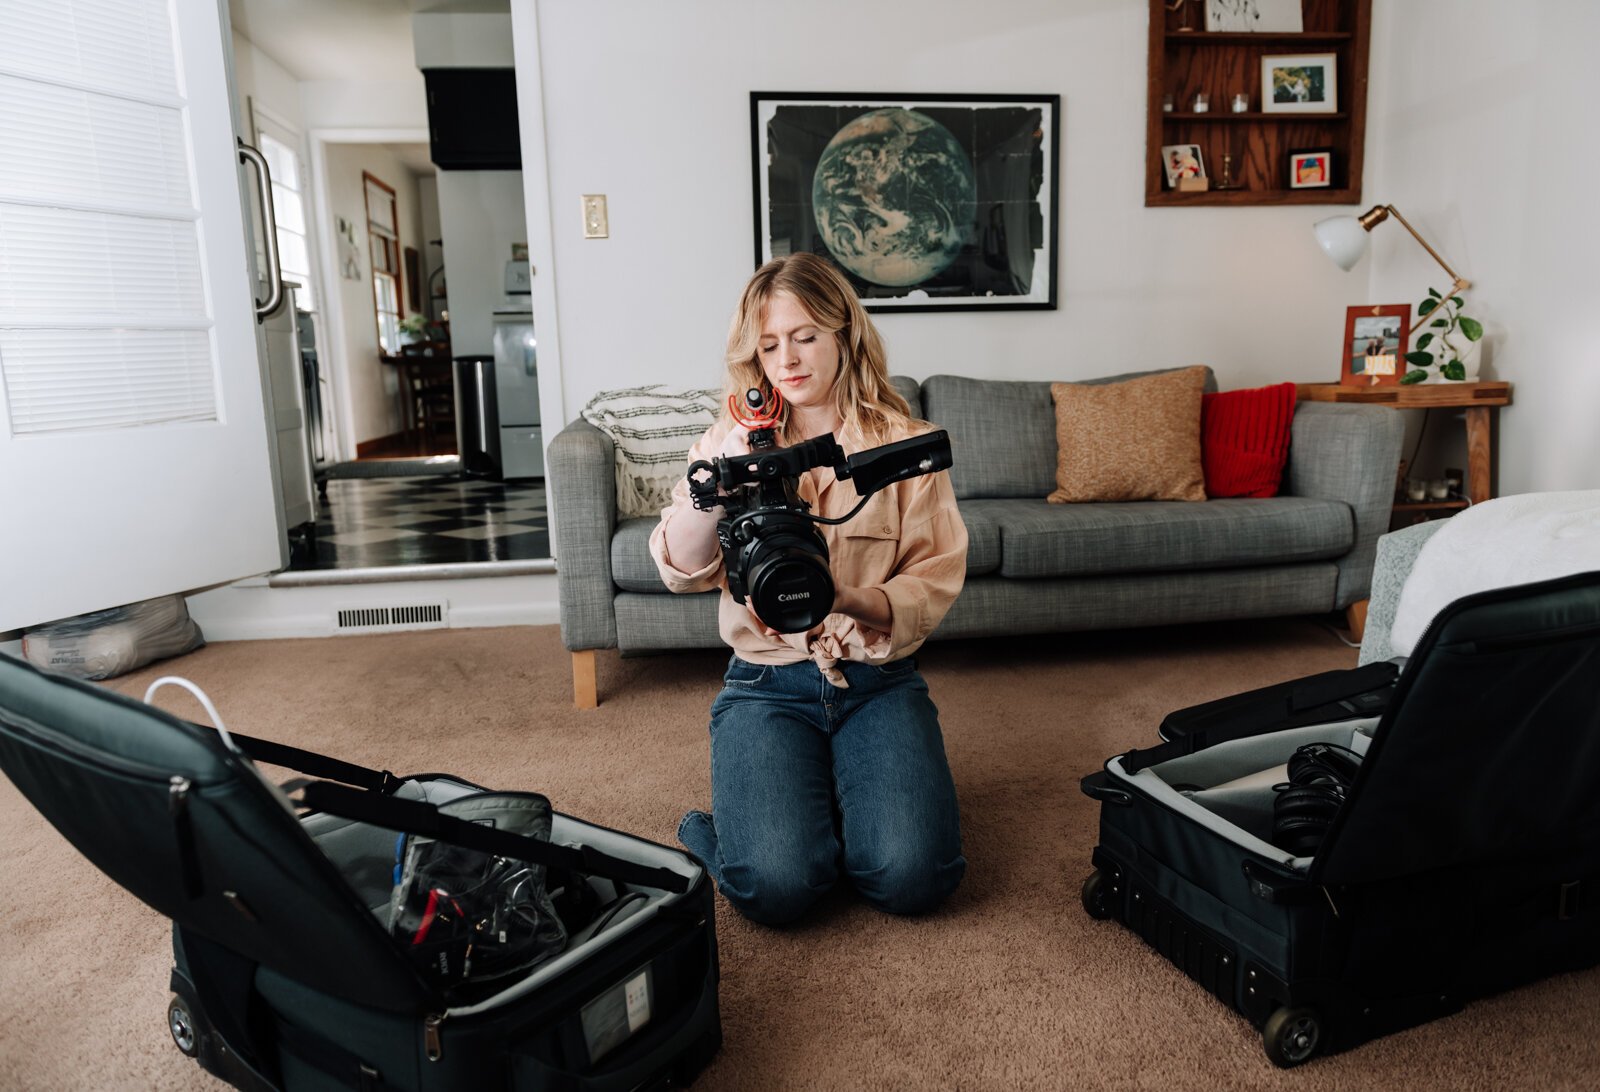 Jordan Bishop, an employee at Bowen Center, works on collecting gear for her next photoshoot for Bowen Center, at her home.